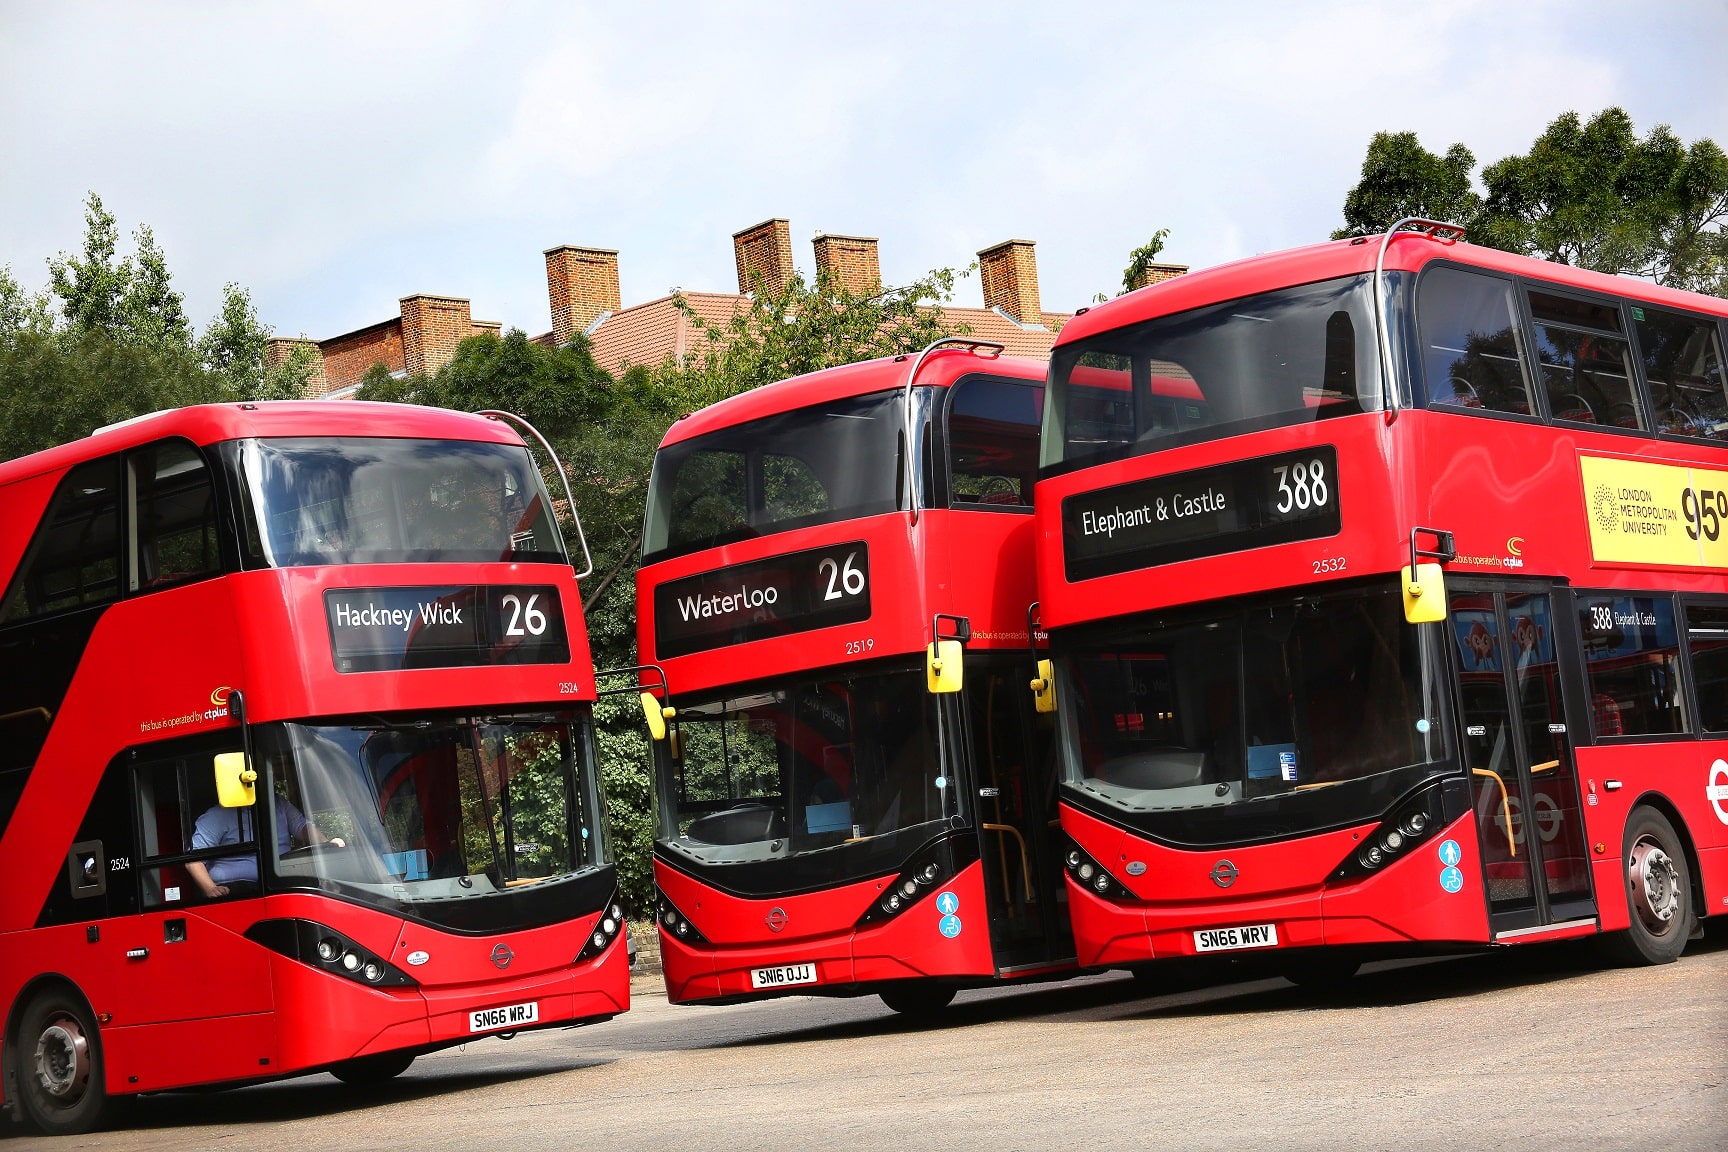 HCT Group in discussion with Stagecoach over London services